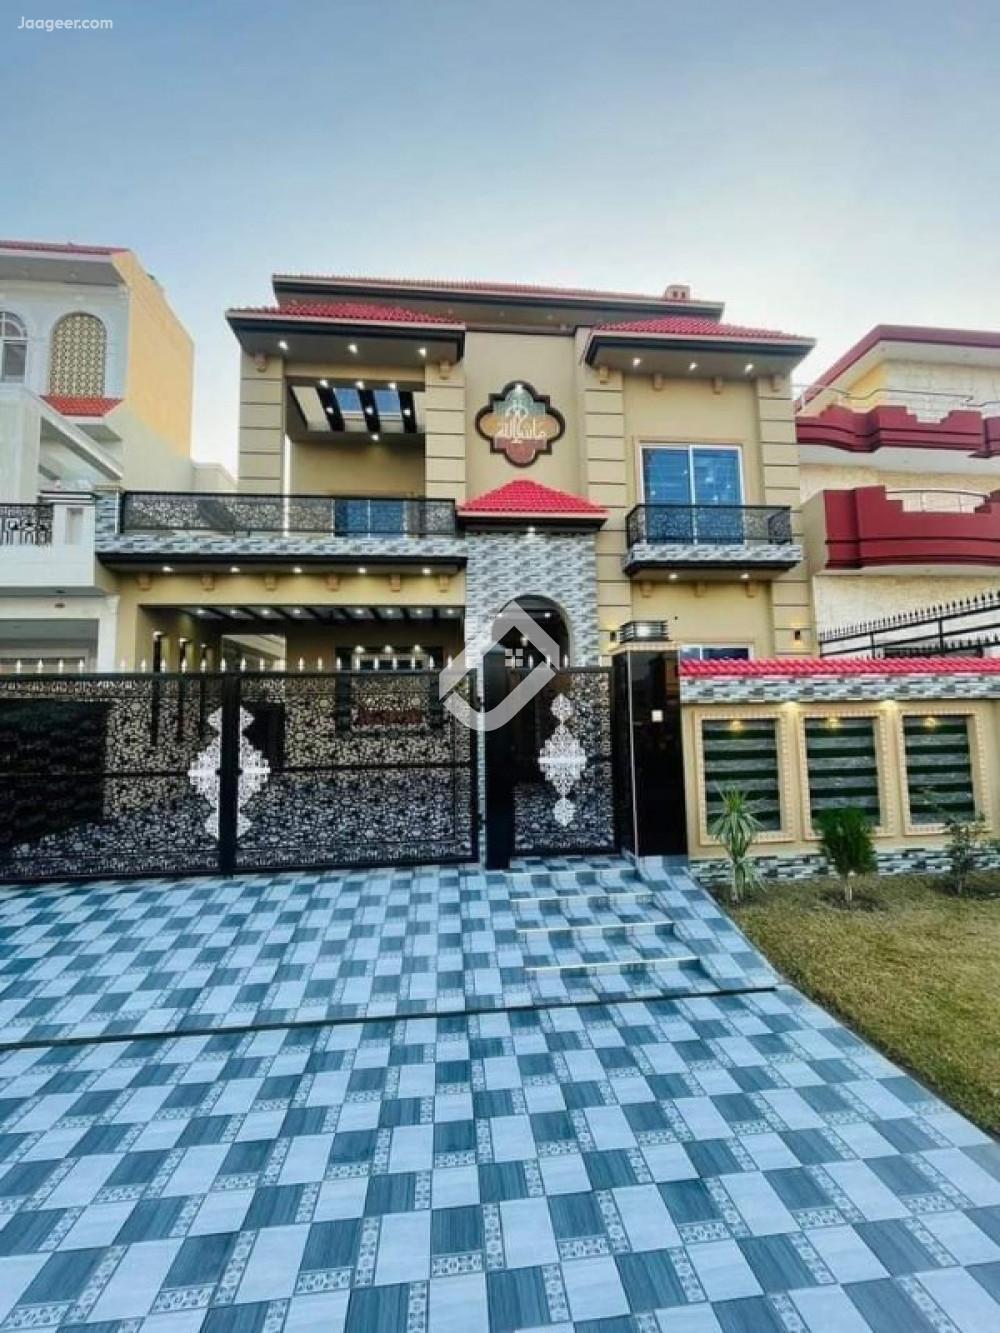 Main image 10 Marla Double Storey House For Sale In Central Park Main Ferozpur Road  Central Park, Lahore